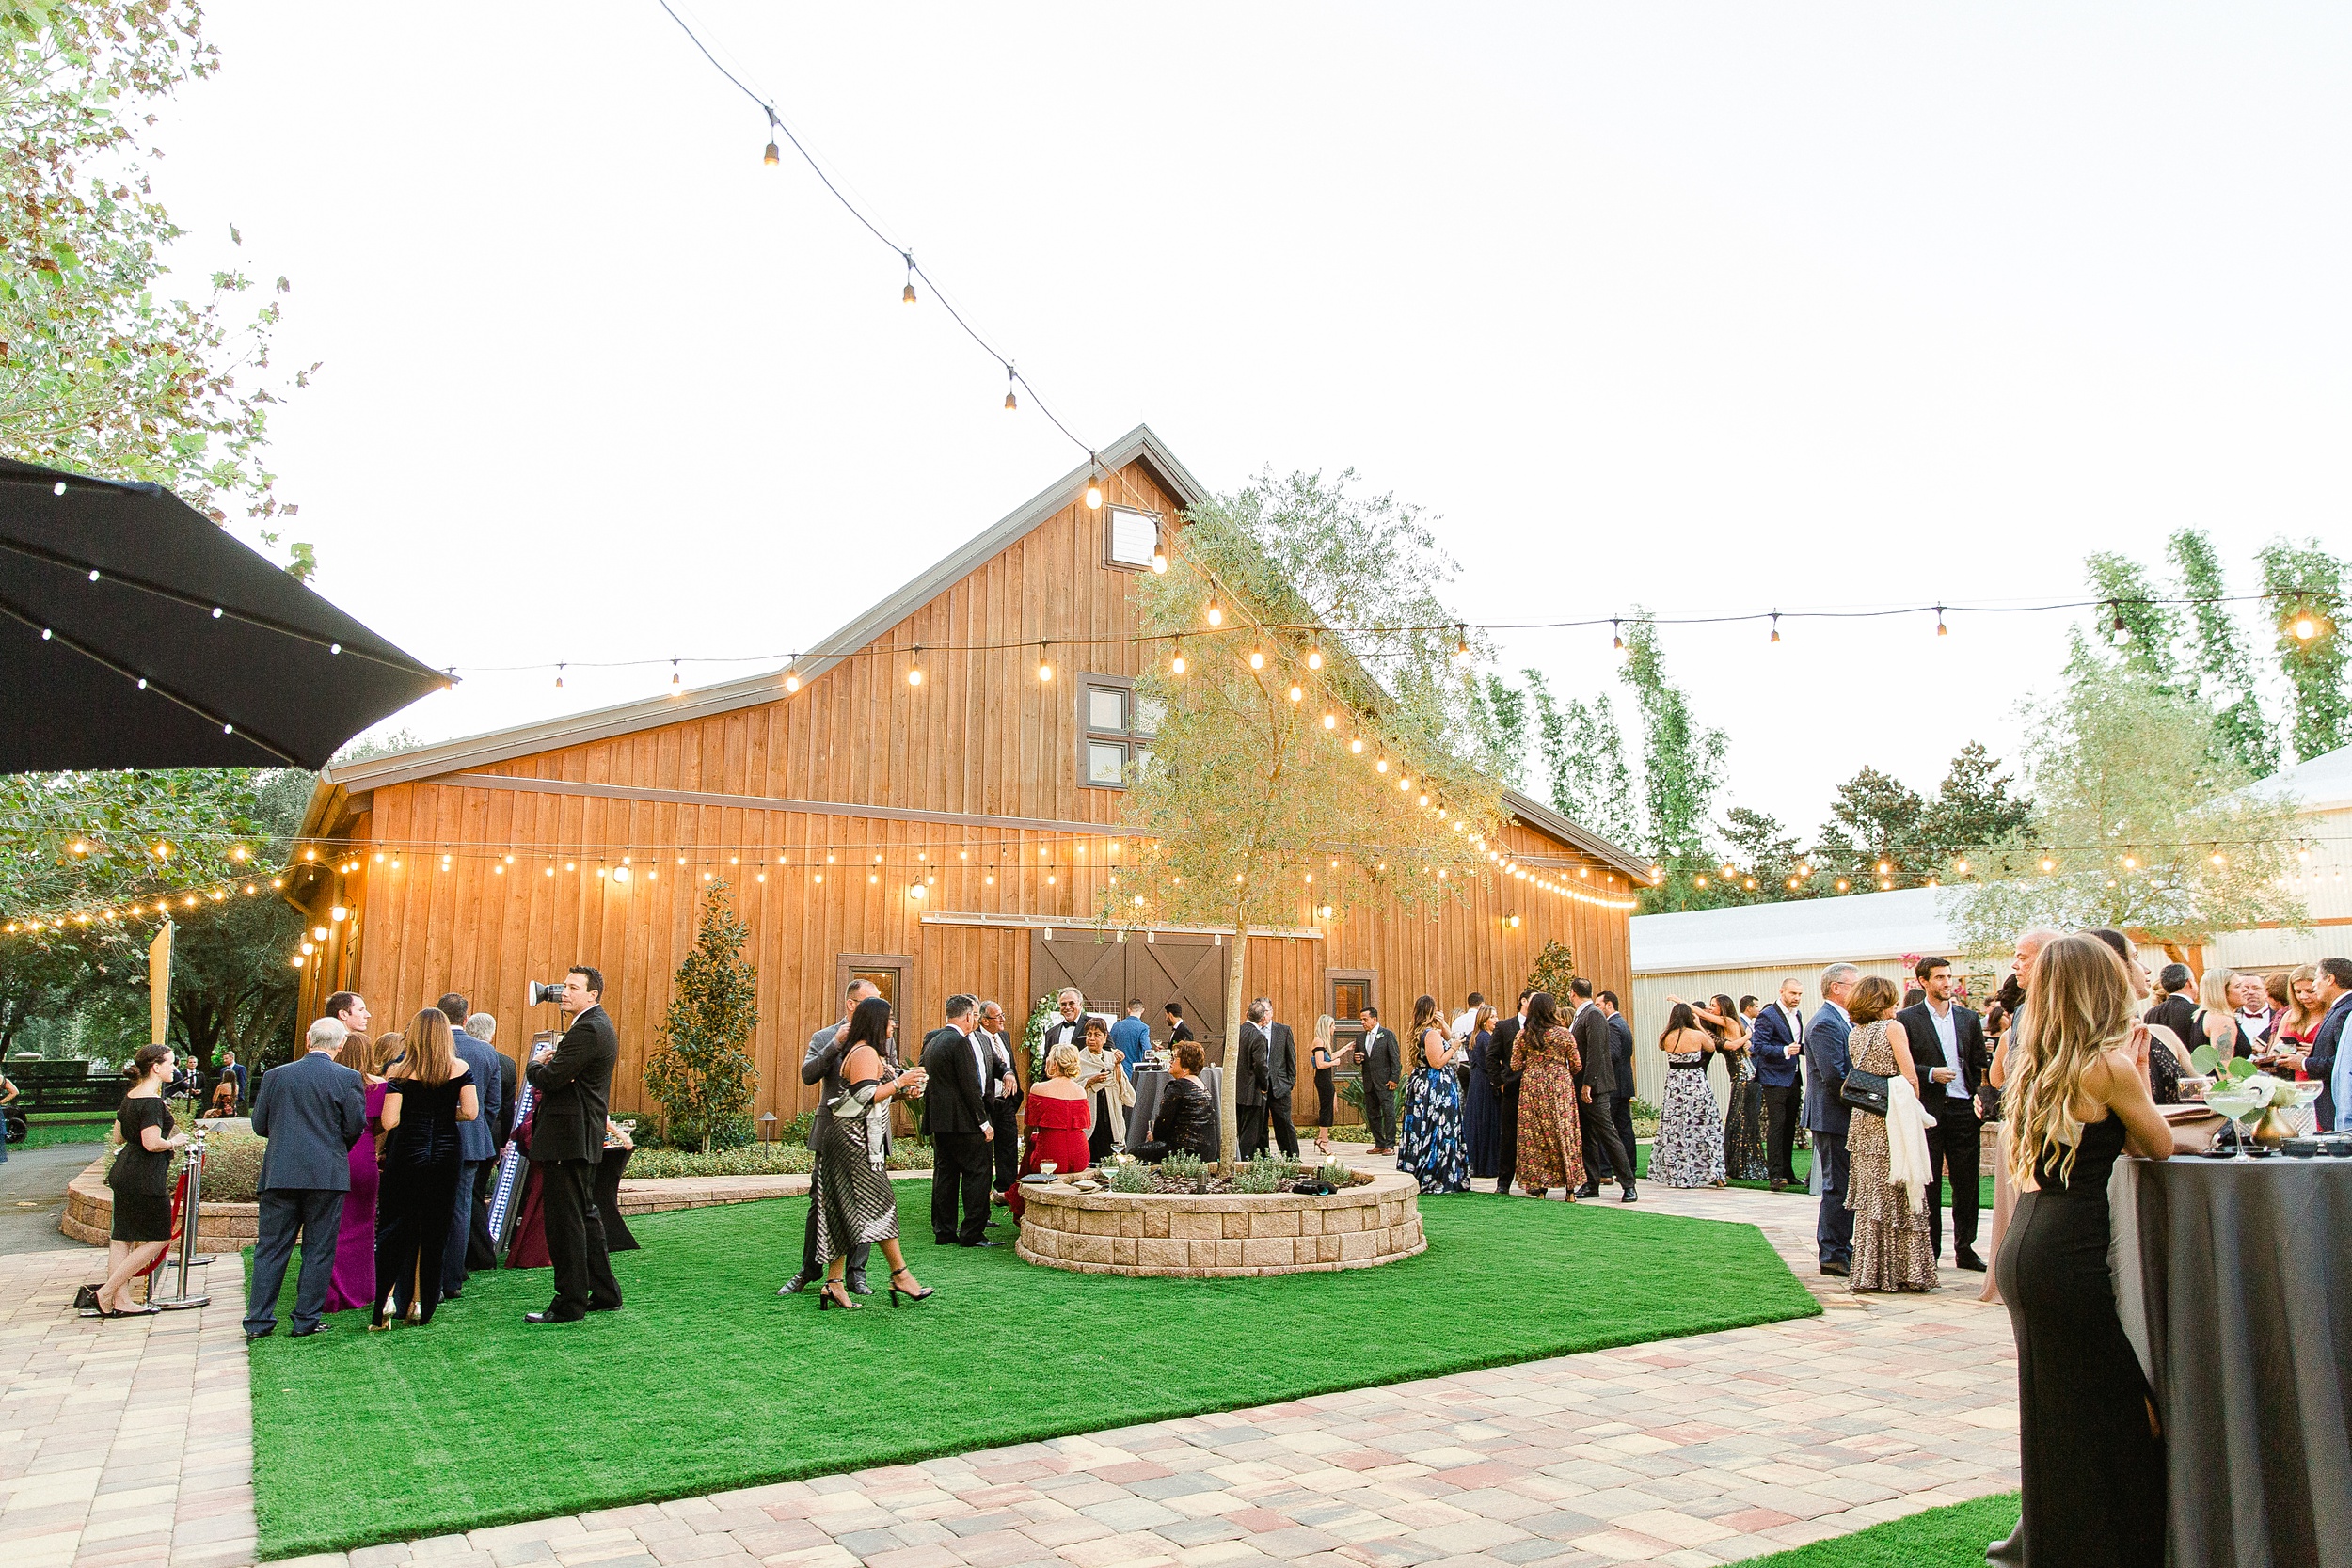 Mision Lago Ranch Wedding Photographer | © Ailyn La Torre Photography 2019